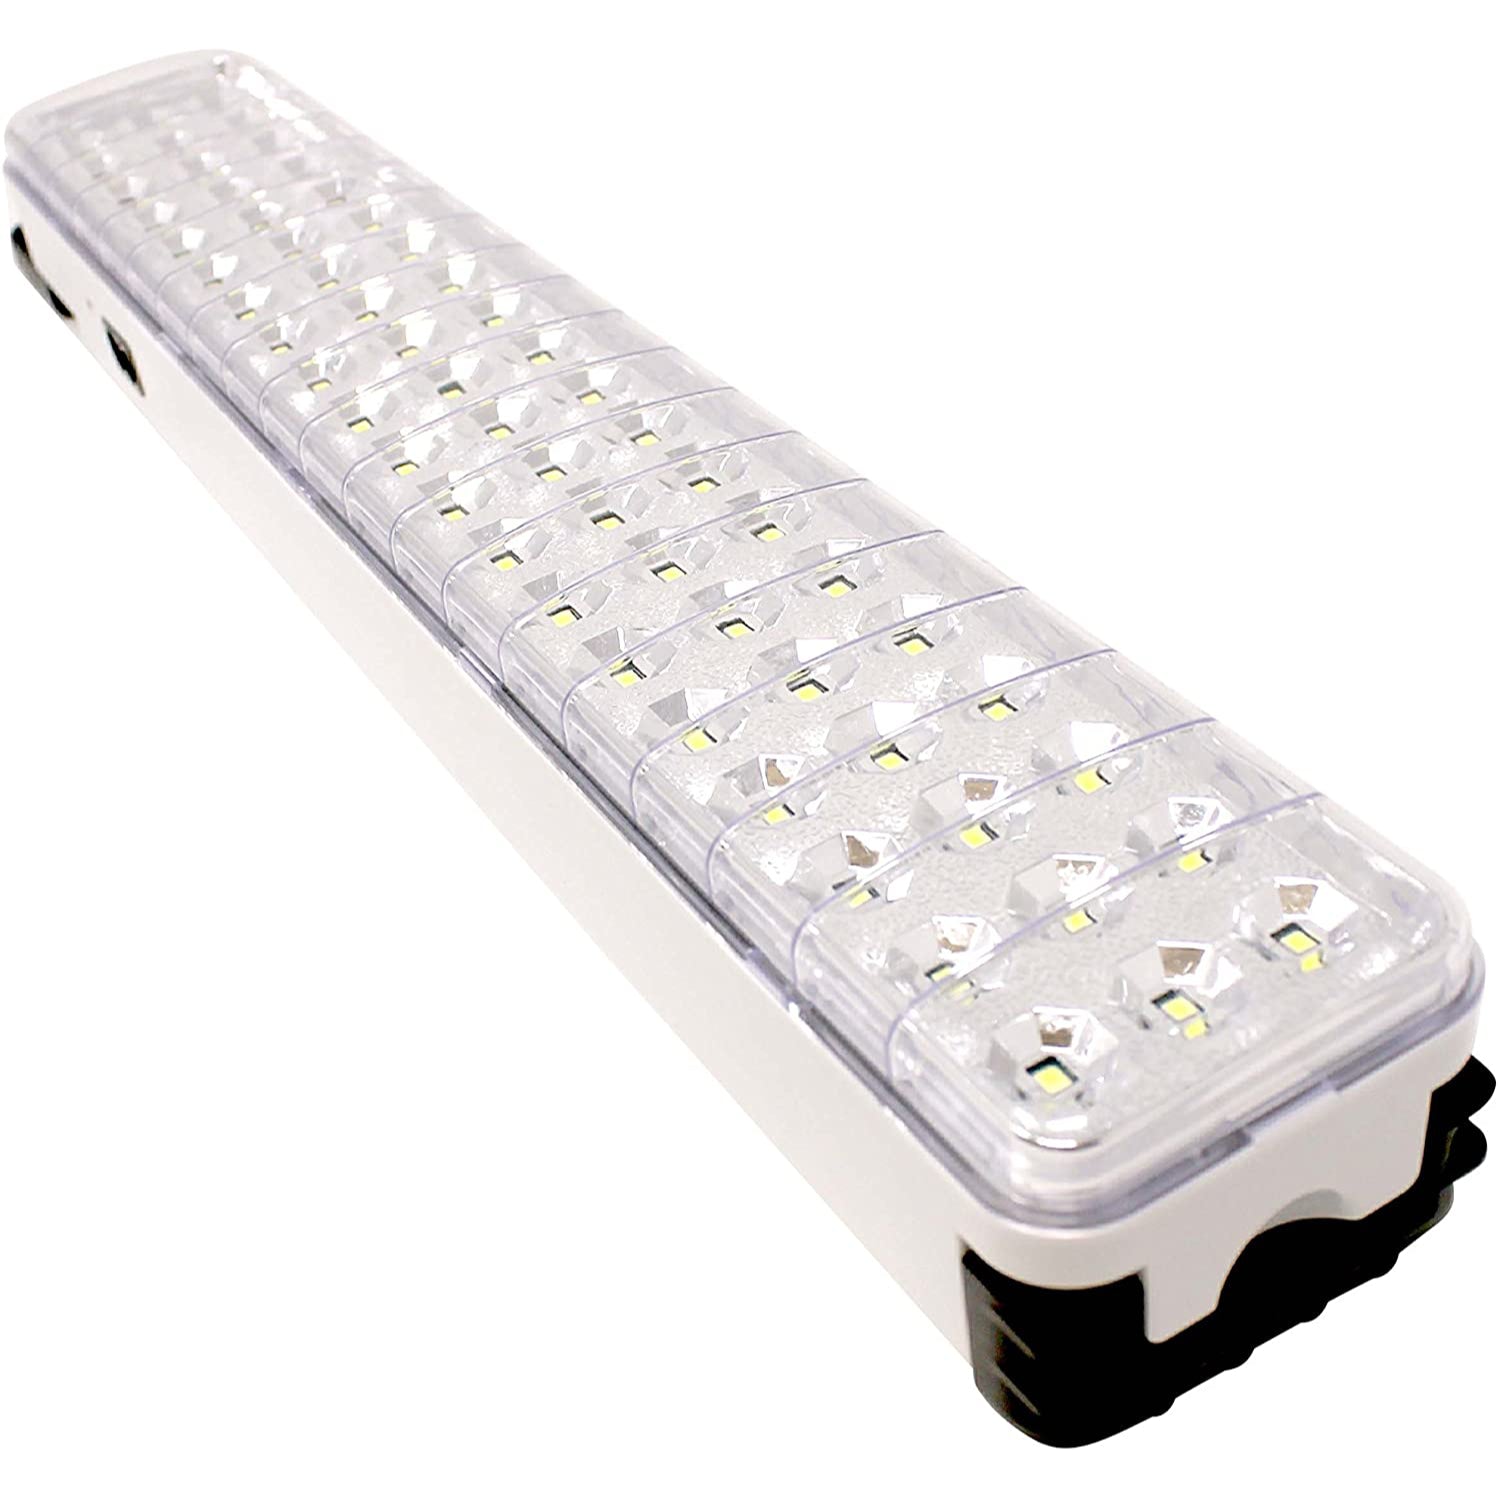 Best Emergency Lighting Power Outage  Emergency Lights Homes Rechargeable  - 30led - Aliexpress